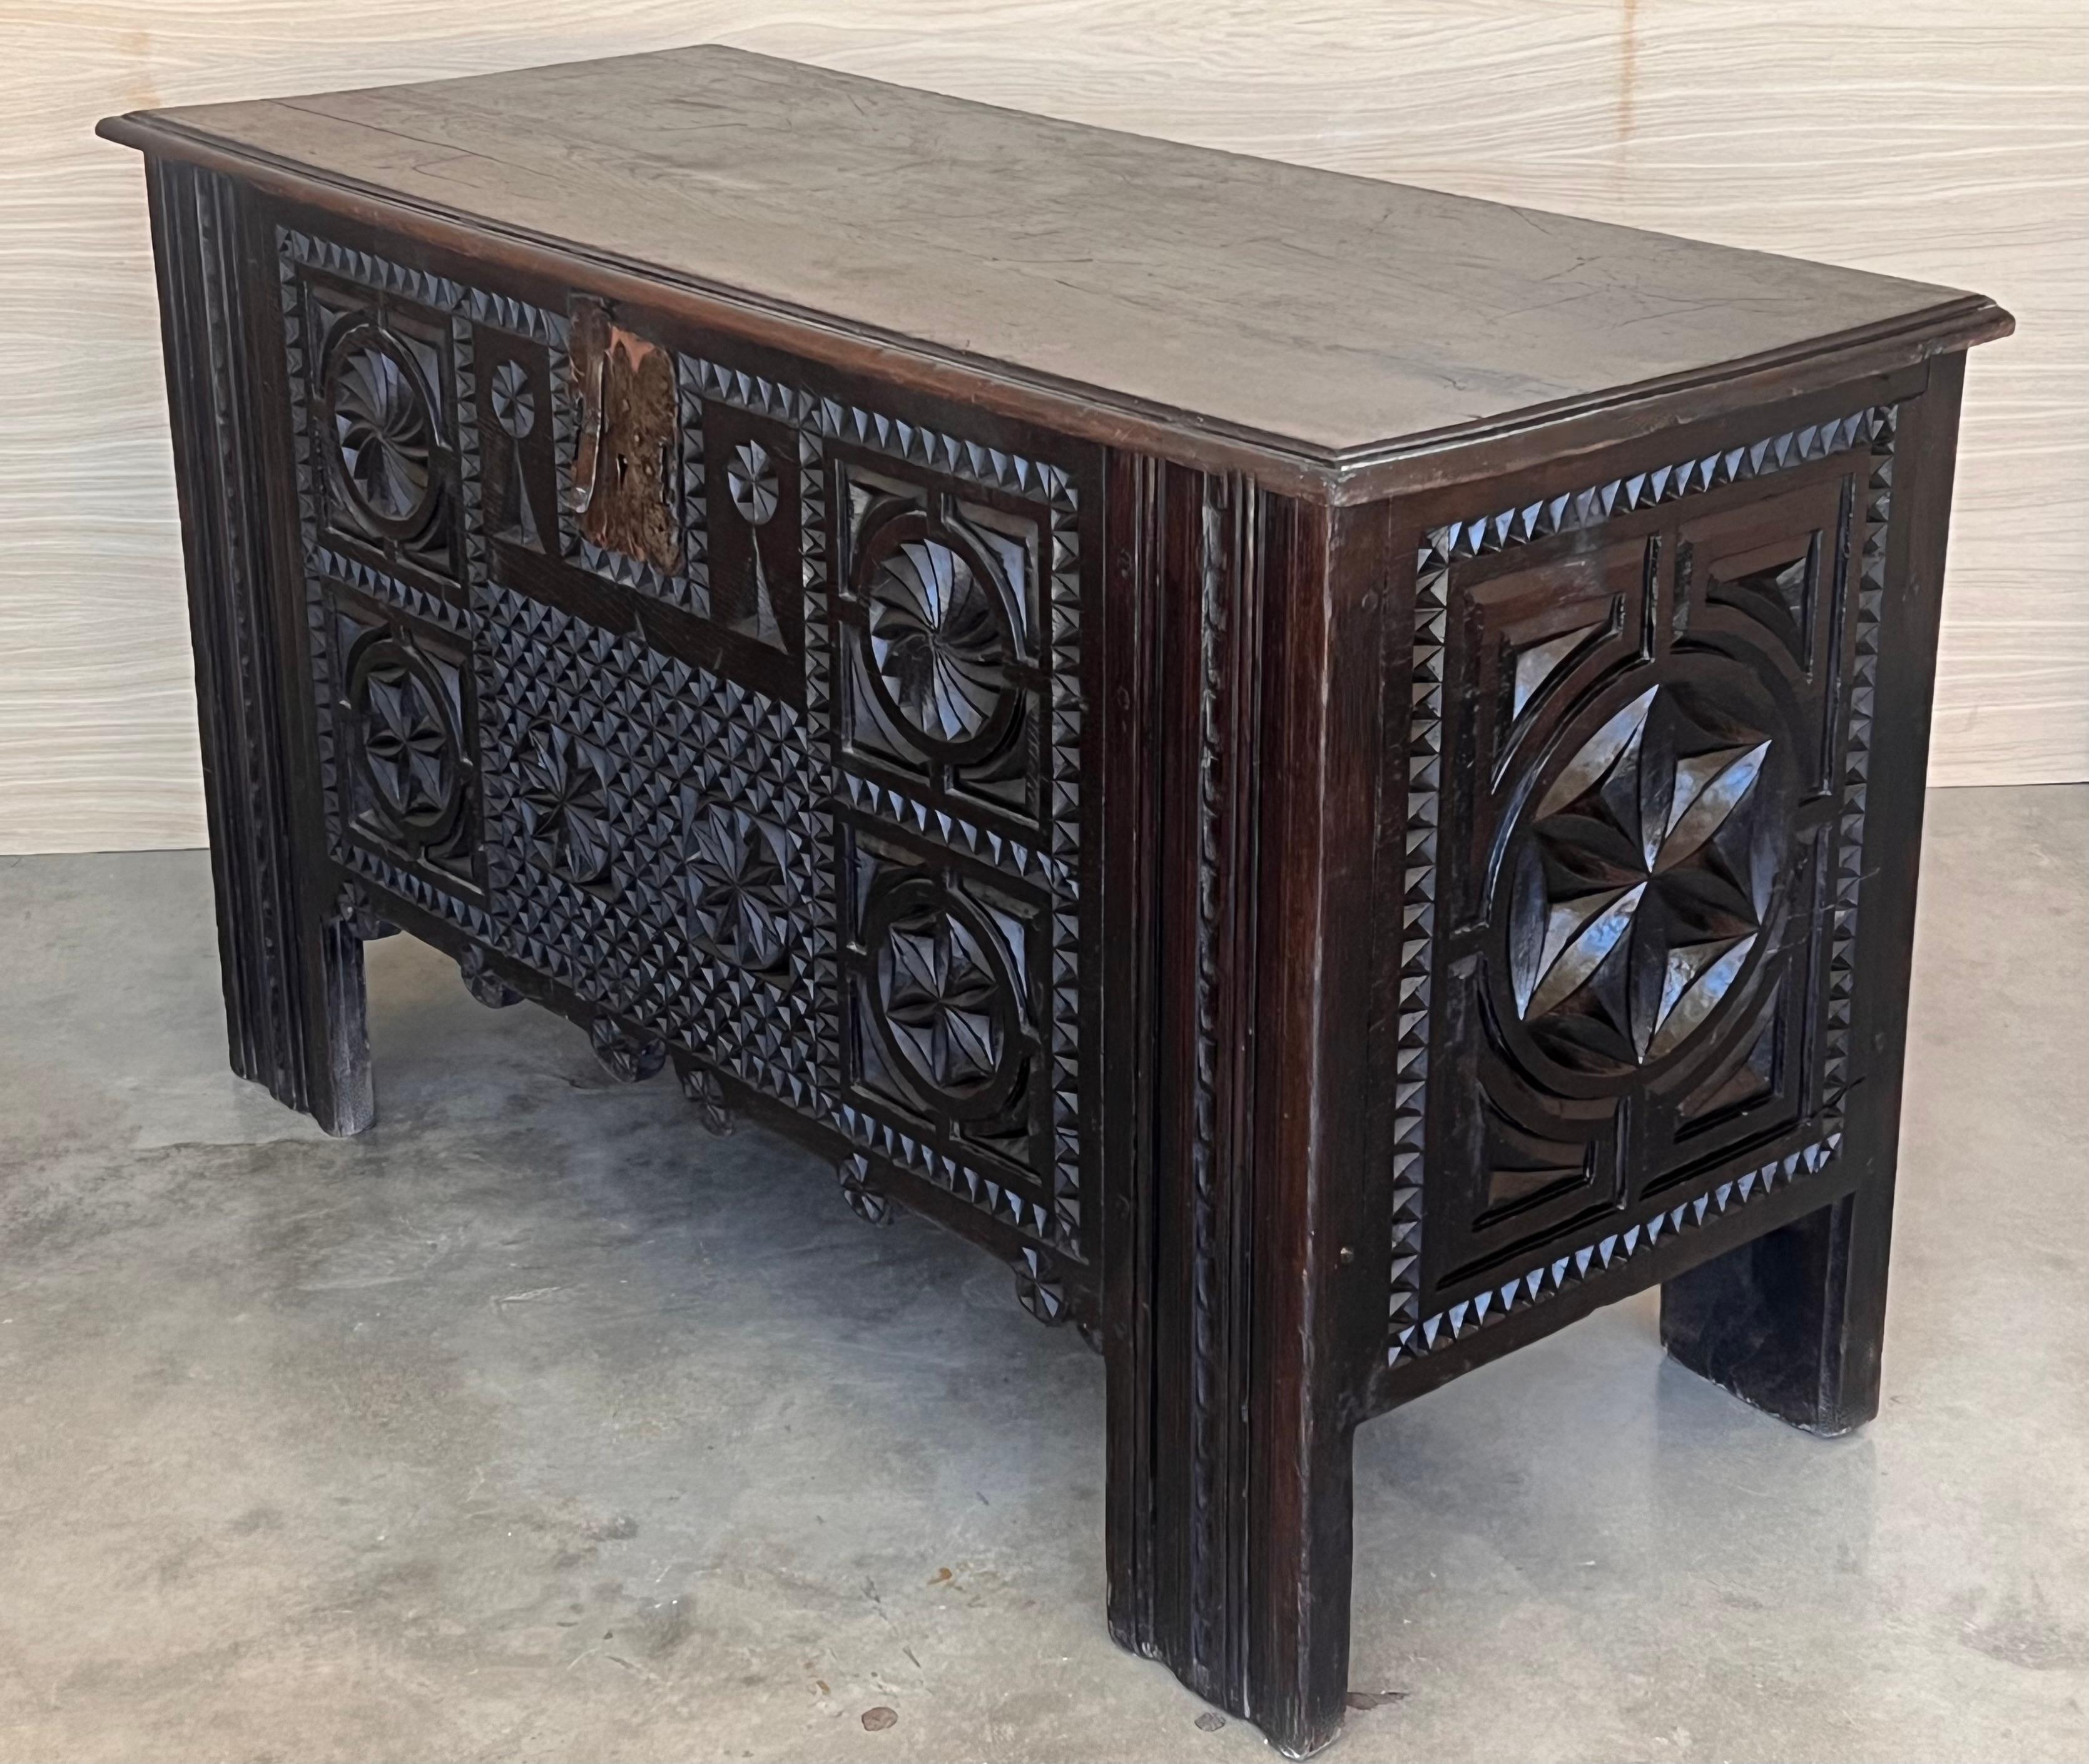 Antique Carved Walnut Large Kutxa Trunk from the Basque Country, Early 1800s In Good Condition For Sale In Miami, FL